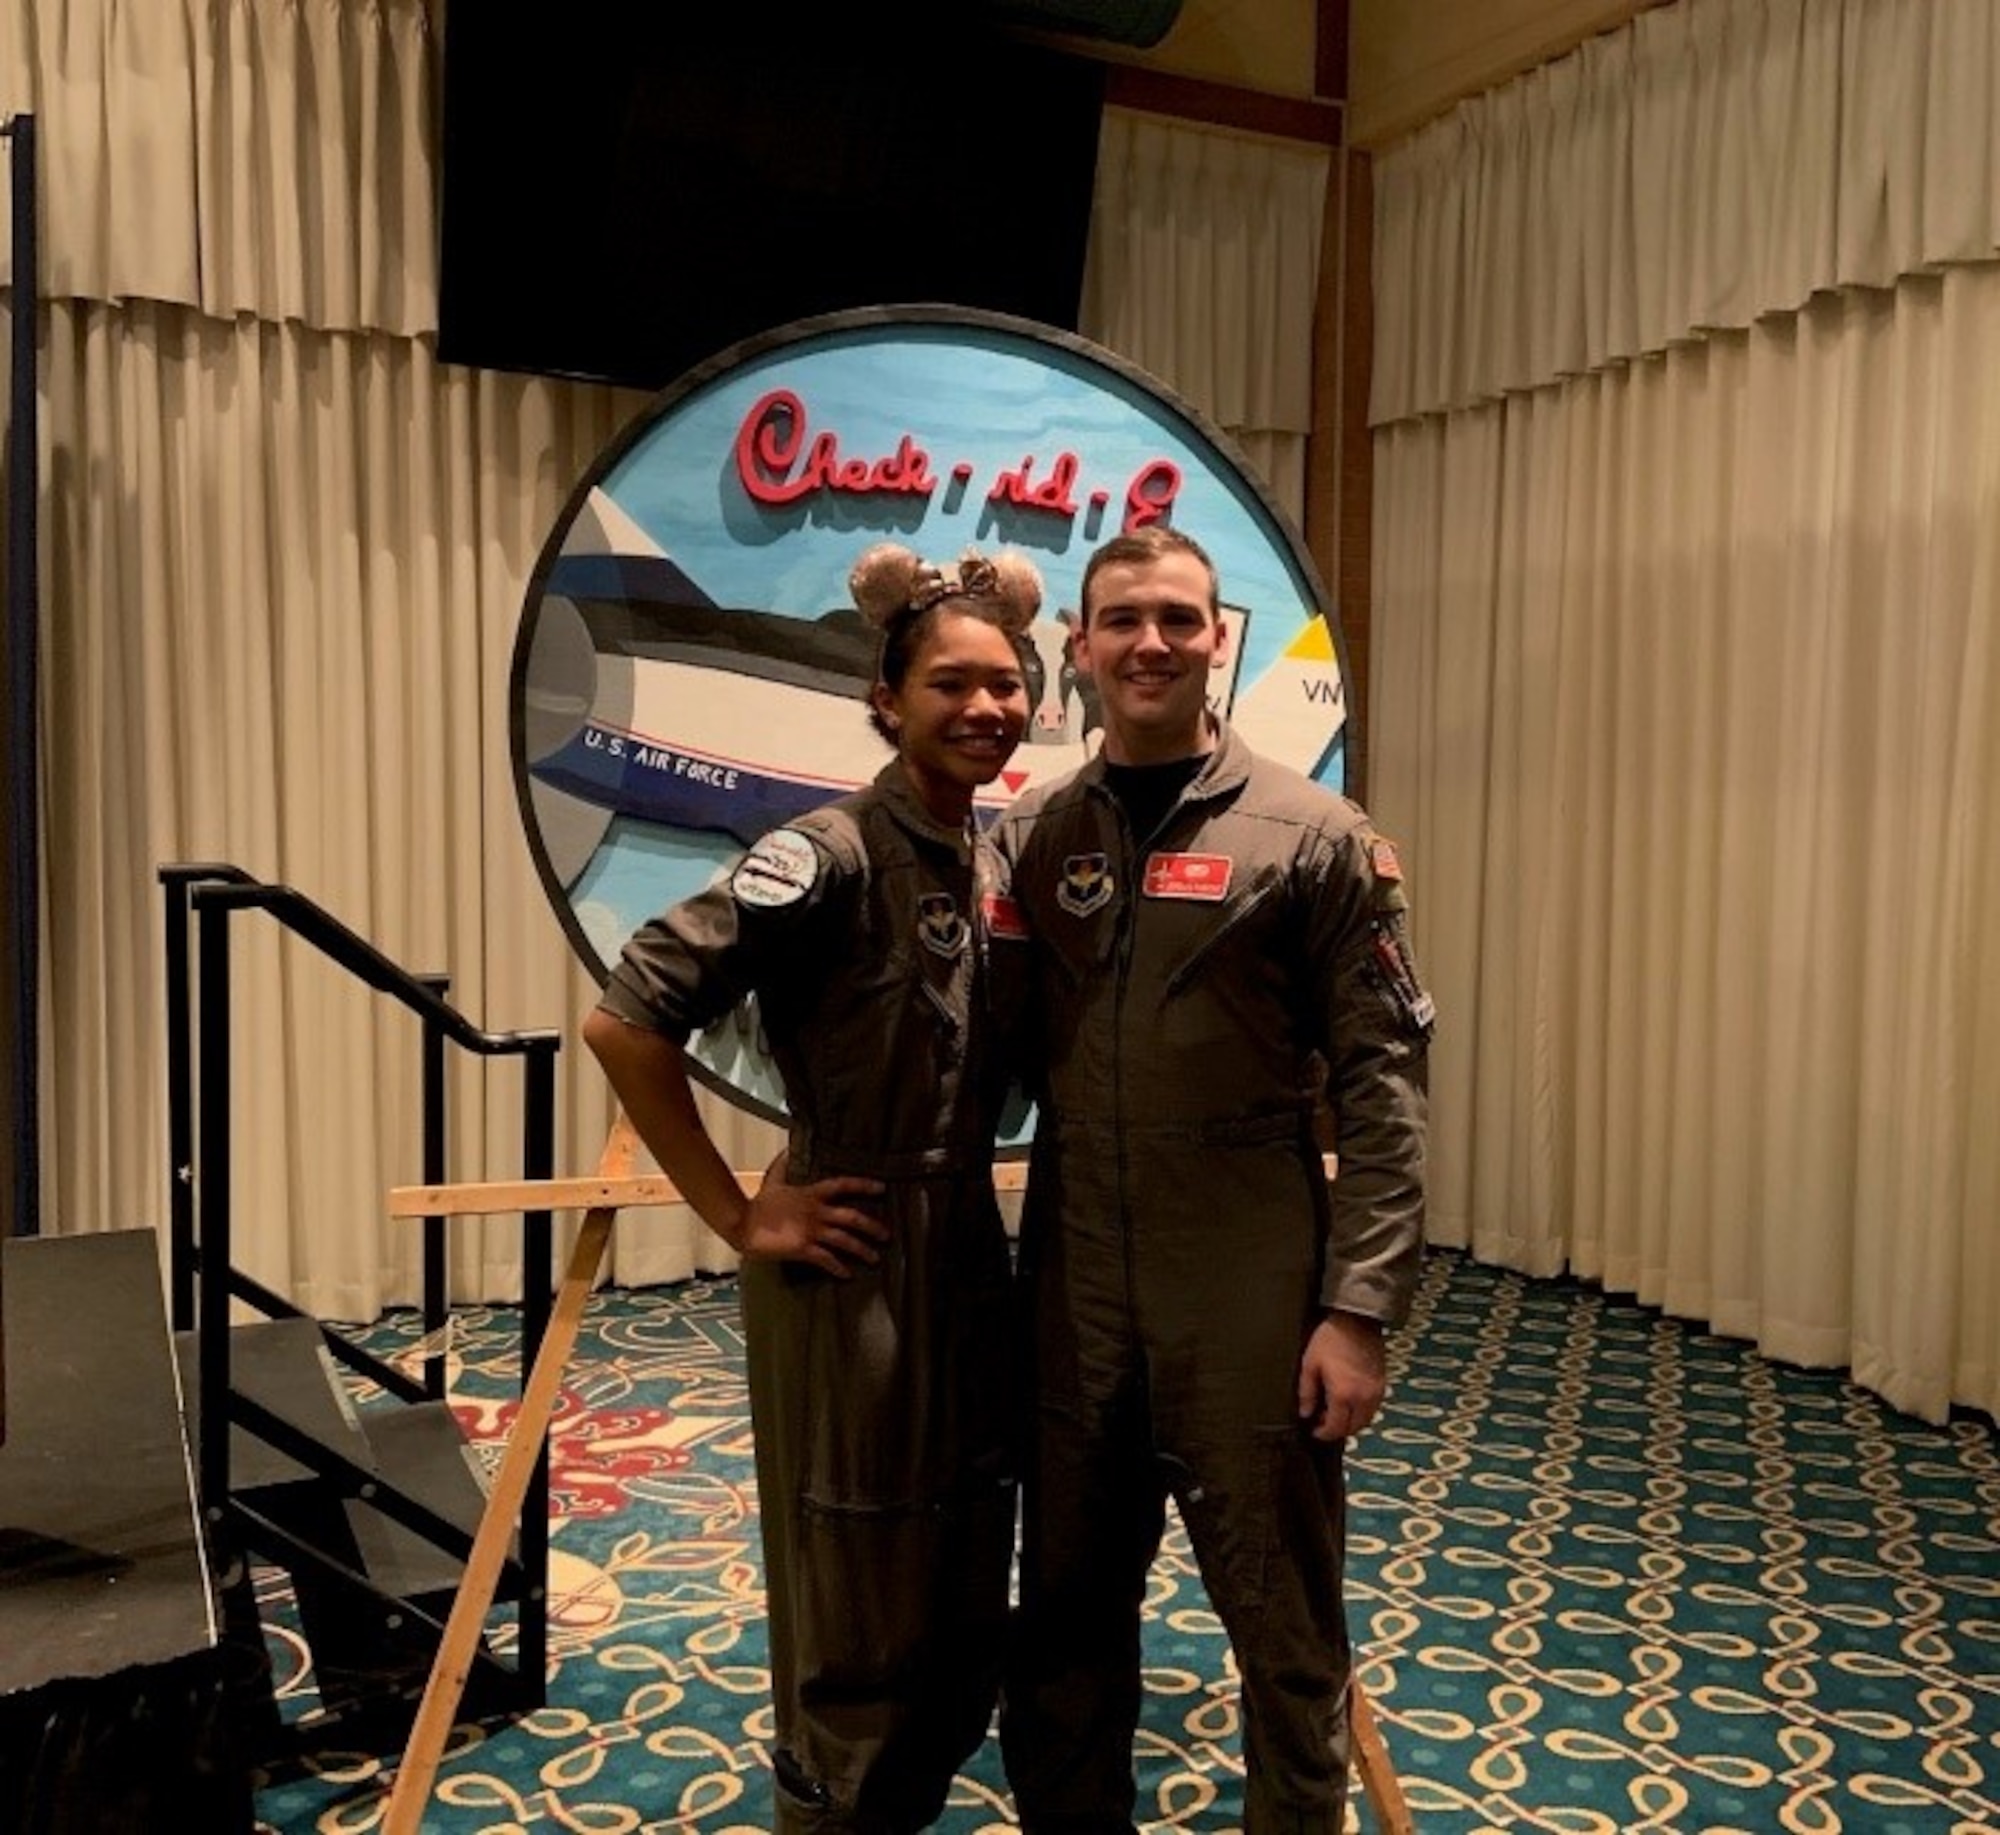 U.S. Air Force 1st Lt. Alicia and 1st Lt. Jordan Paecth, 75th Expeditionary Airlift Squadron safety officers, pose for a photo in their flight suits during pilot training at Laughlin Air Force Base, Texas. Safety representatives help ensure agencies within the Air Force maintain the proper safety techniques in the workplace to ensure mission success.